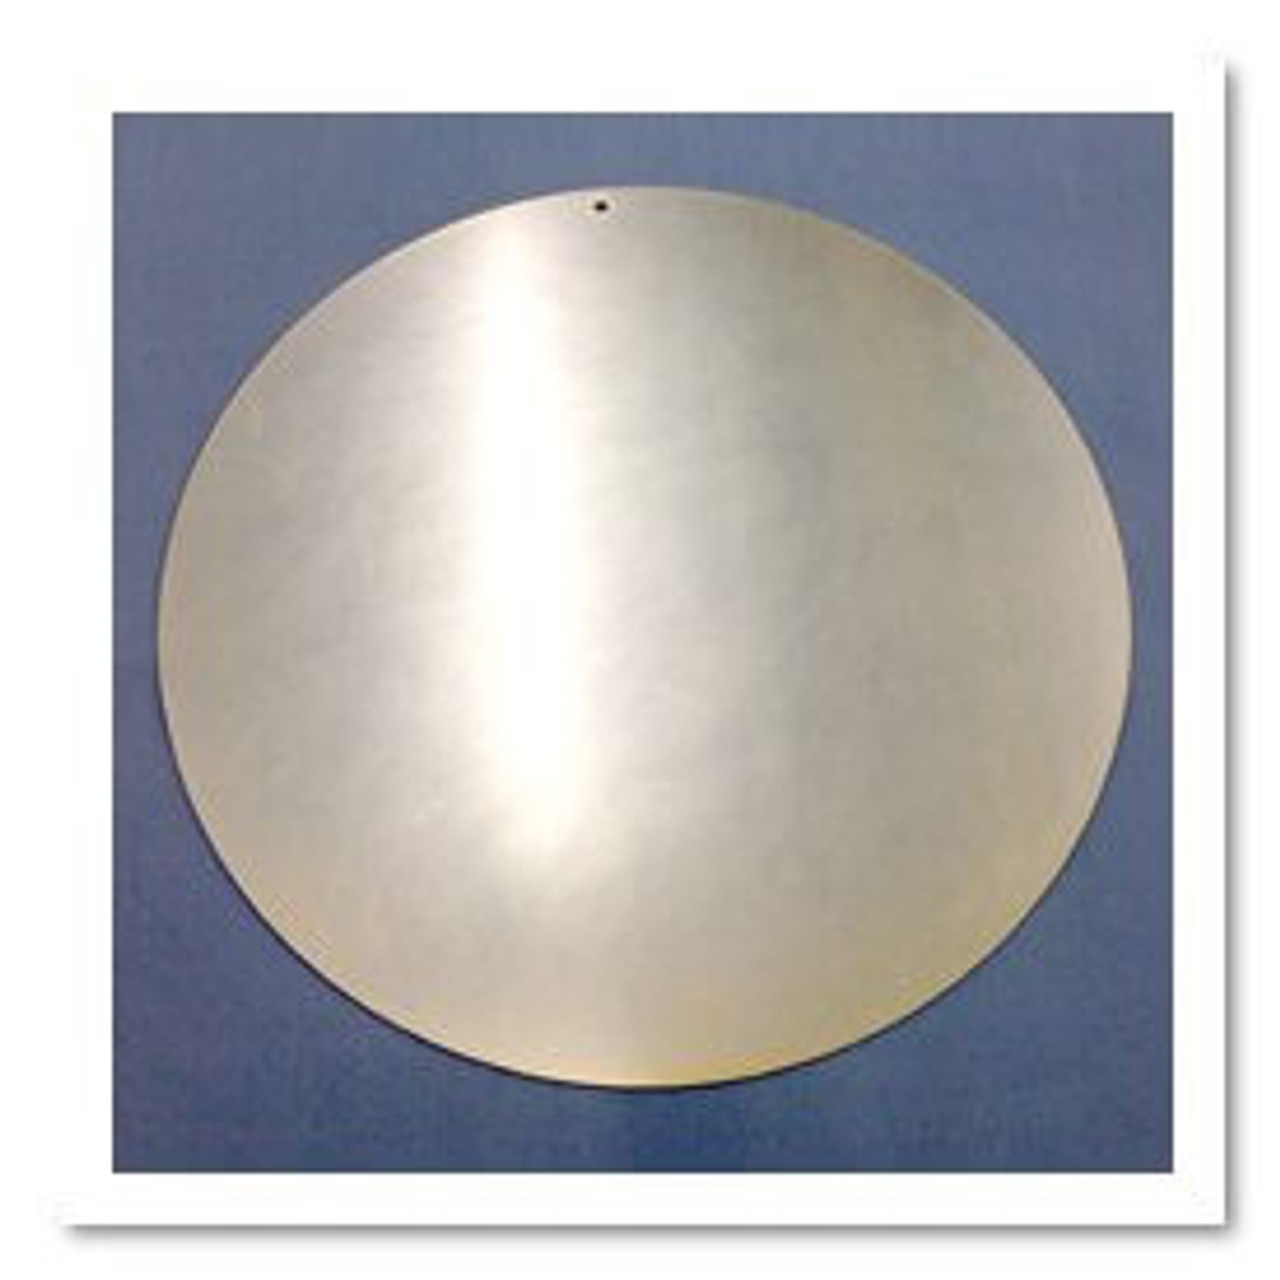 Cms Magnetics - (20 x 10 Stainless Steel Surface Plate 1mm Thickness 200 in² Flat Ferromagnetic Metal Sheet Board to Hang Your Magnets, Mount on